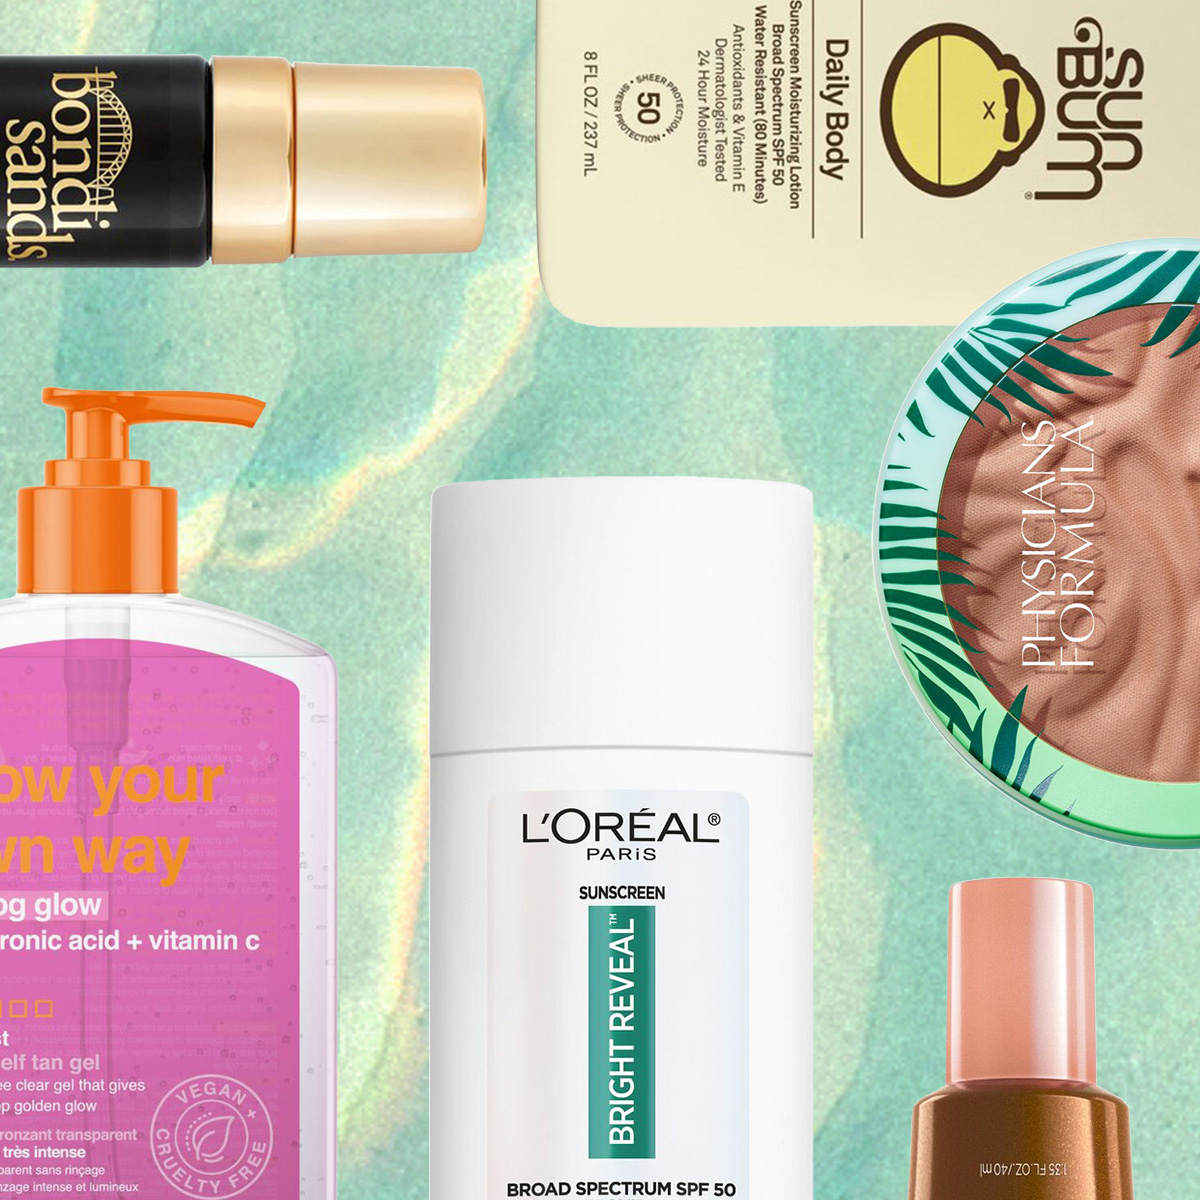 The Best Sunscreens and Self-Tanners for an Immaculate Summer Glow